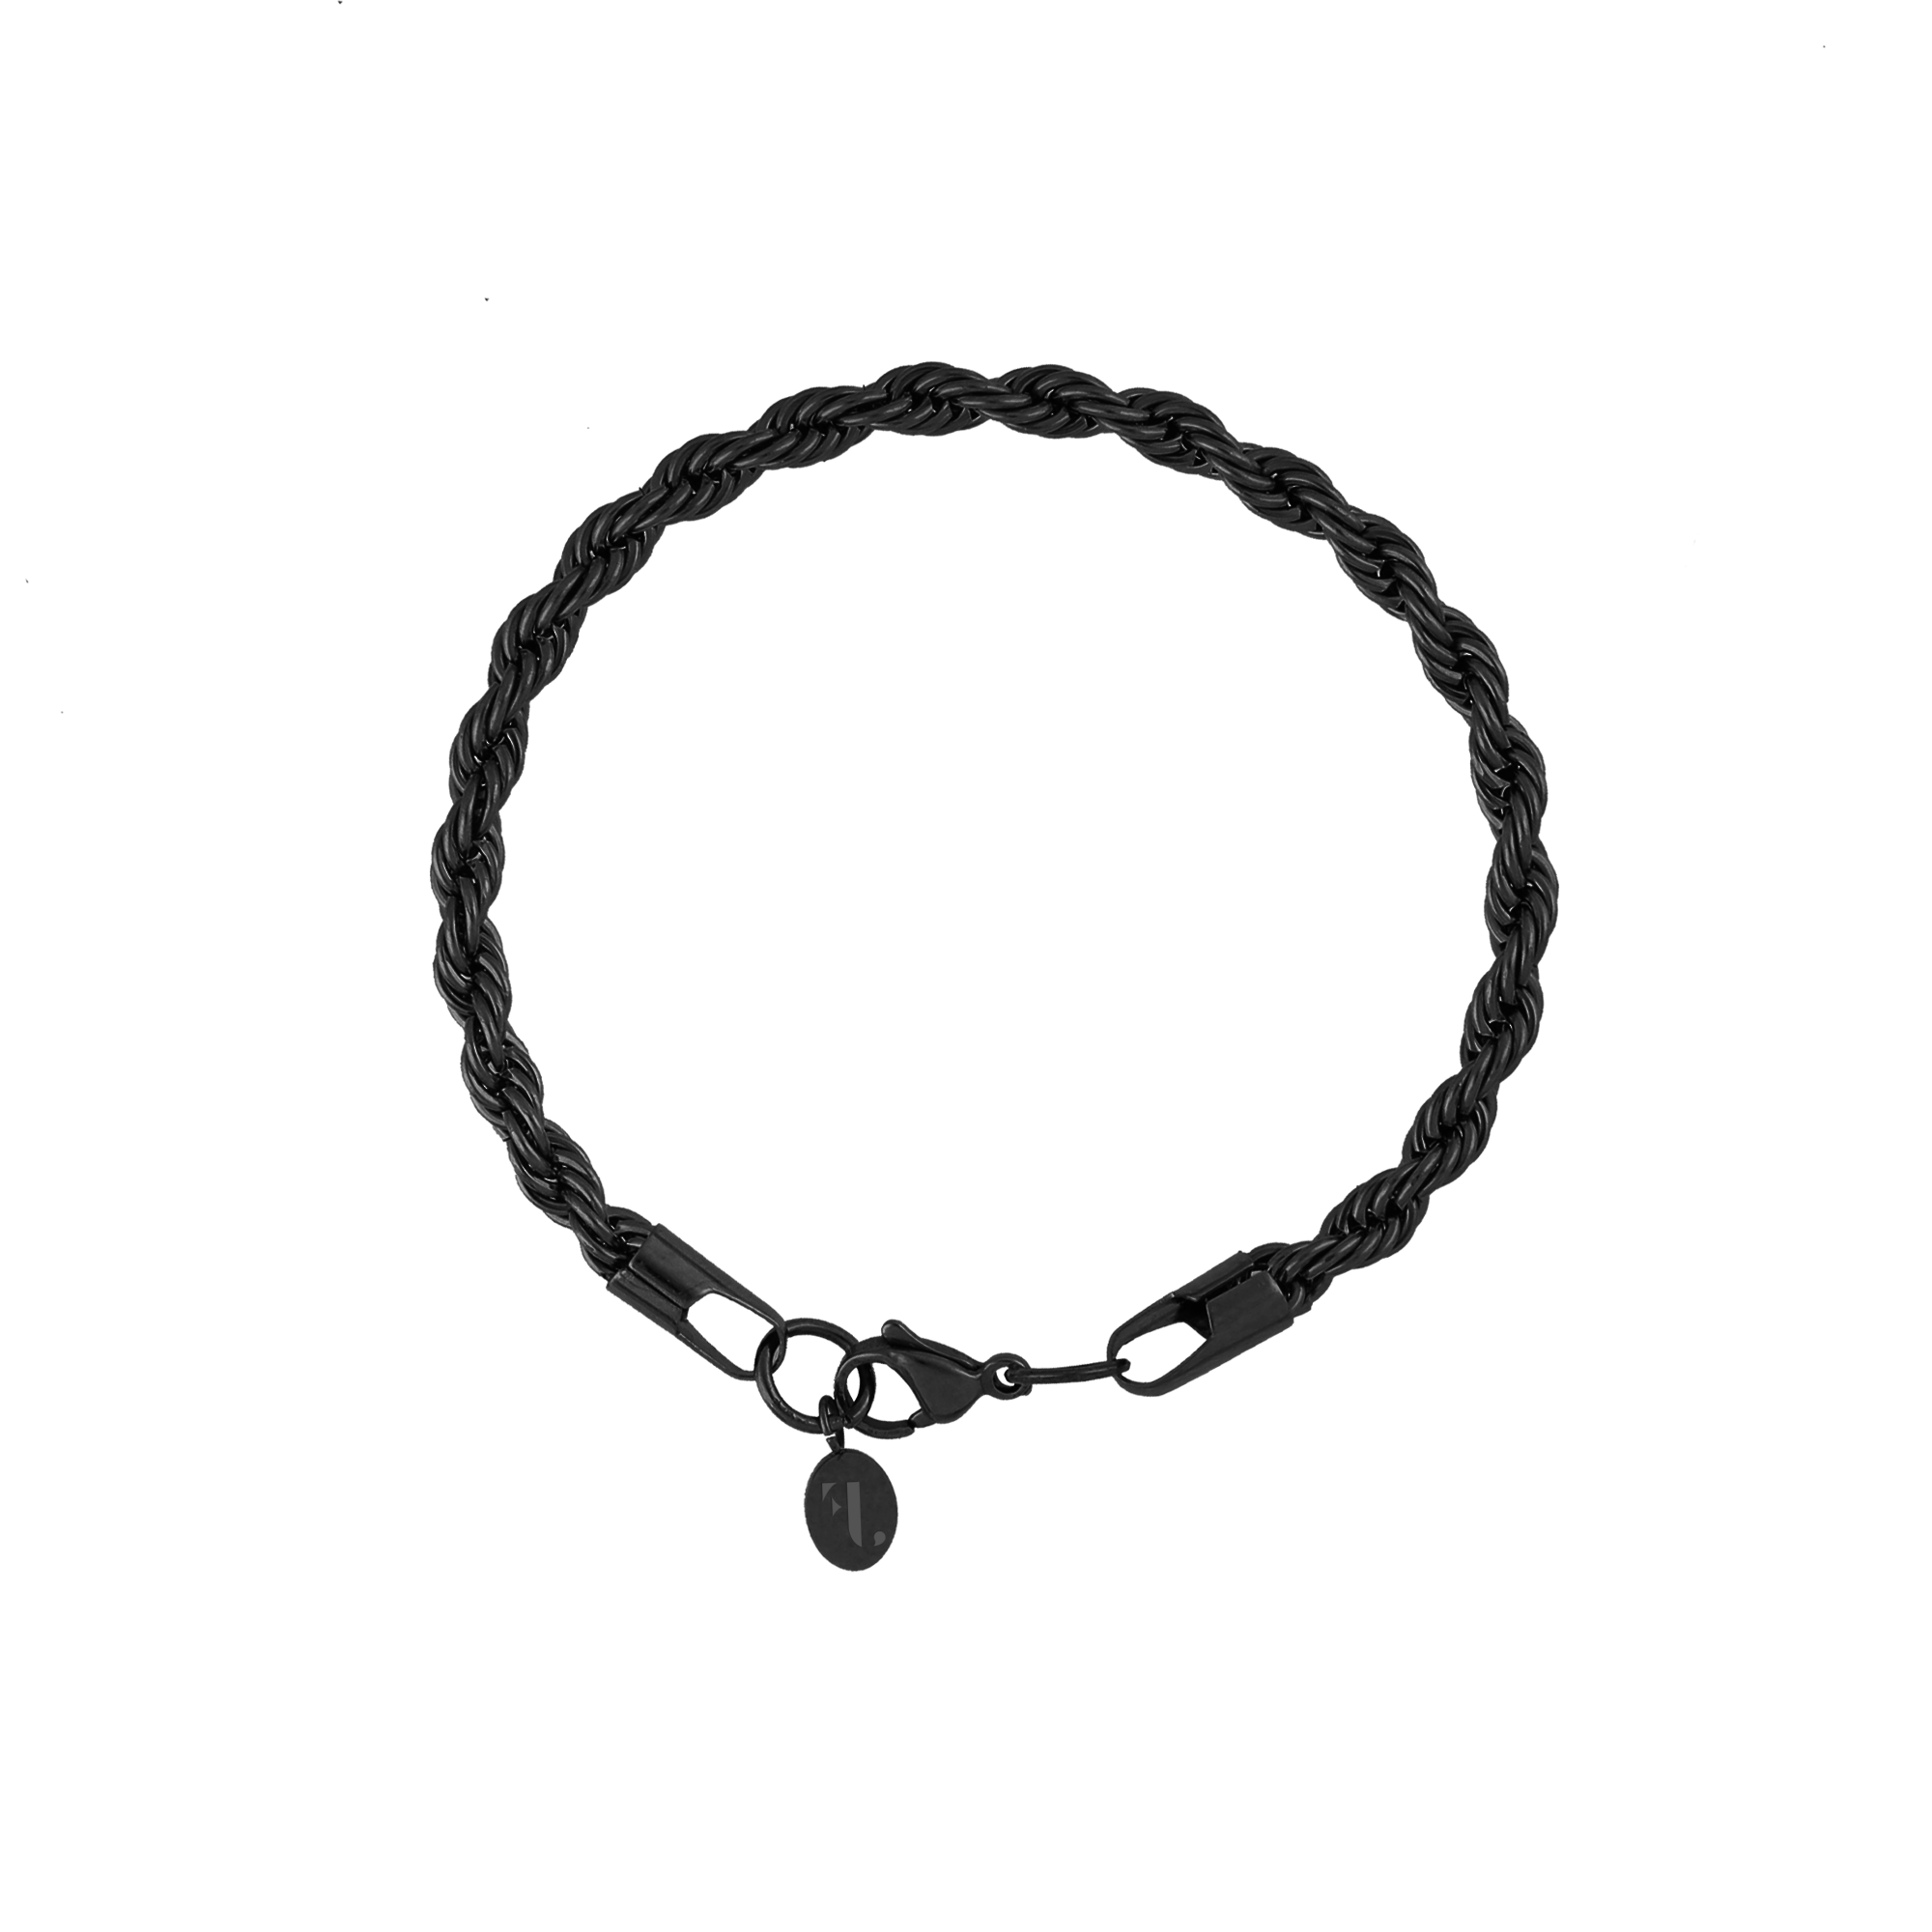 Don men's bracelet by Five Jwlry, crafted from a bold 5mm French rope twisted chain in black-colored, water-resistant 316L stainless steel. Available in sizes 20cm and 22cm. Hypoallergenic with a 2-year warranty.